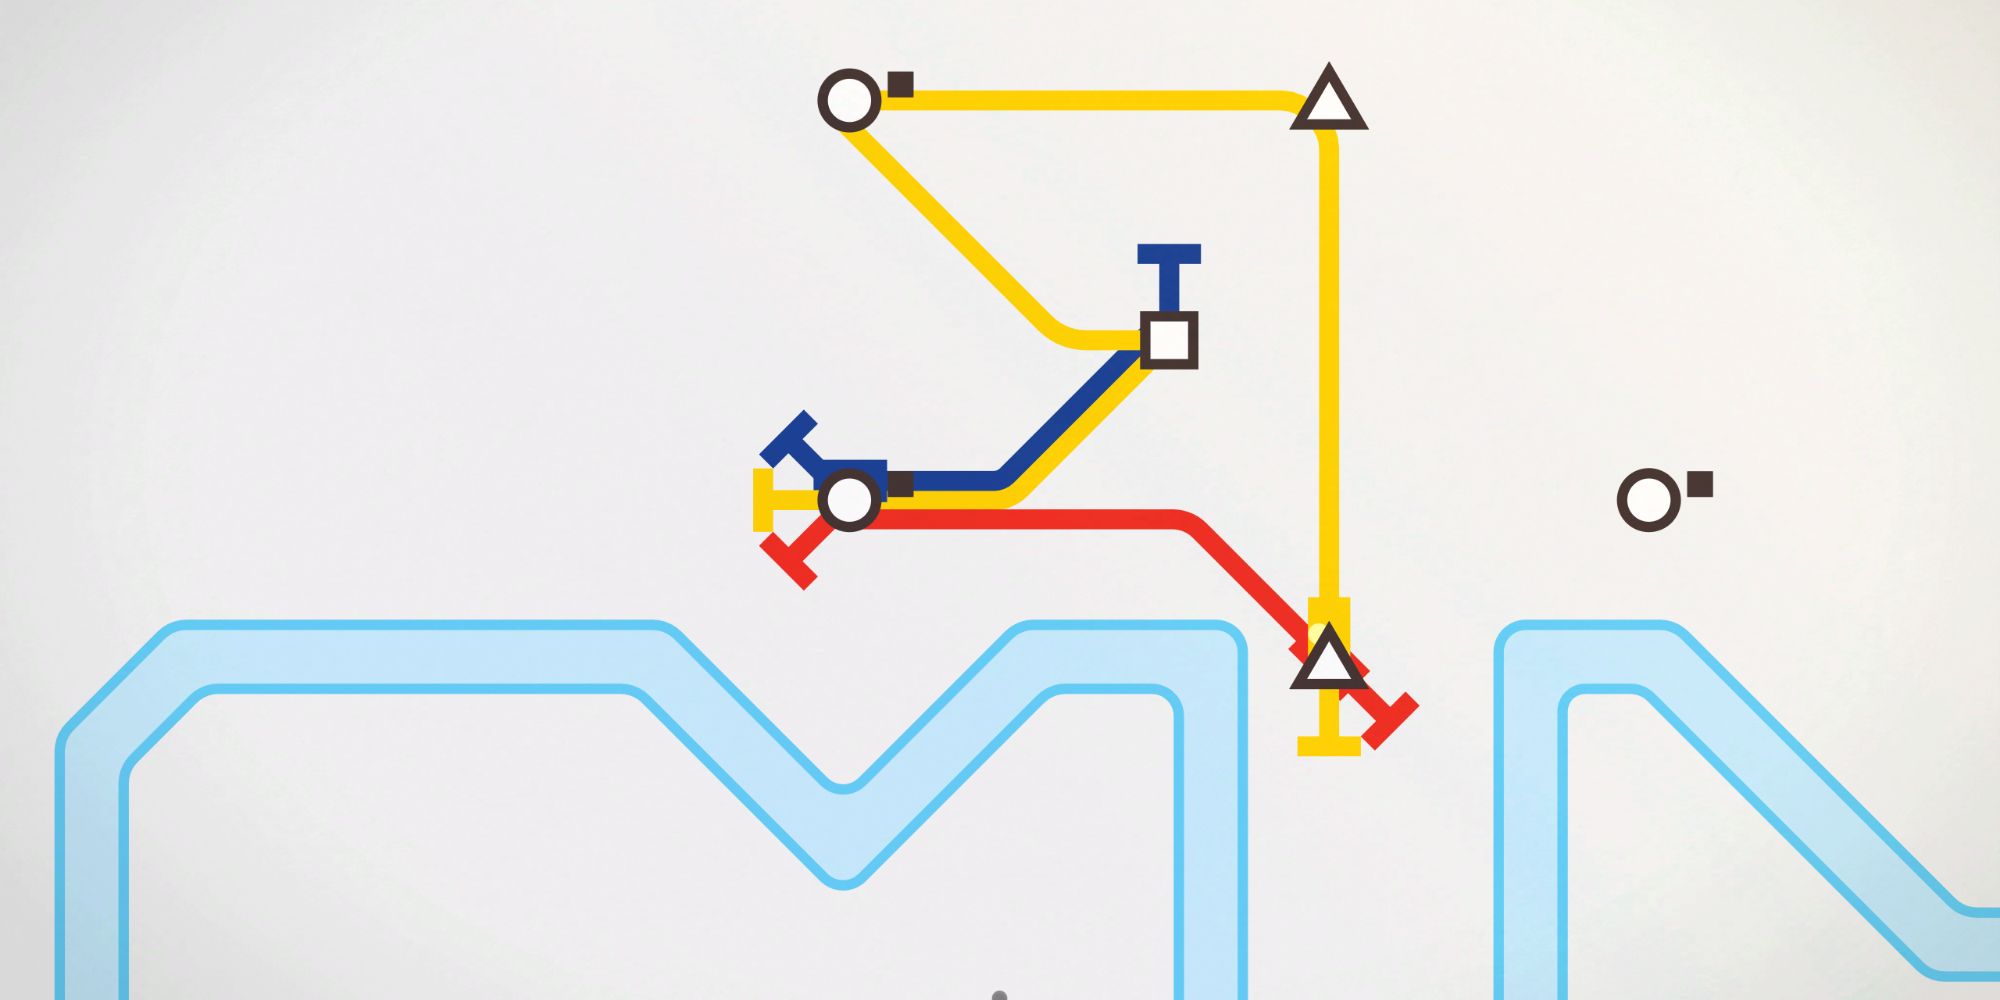 Mini Metro colored lines connecting to shapes